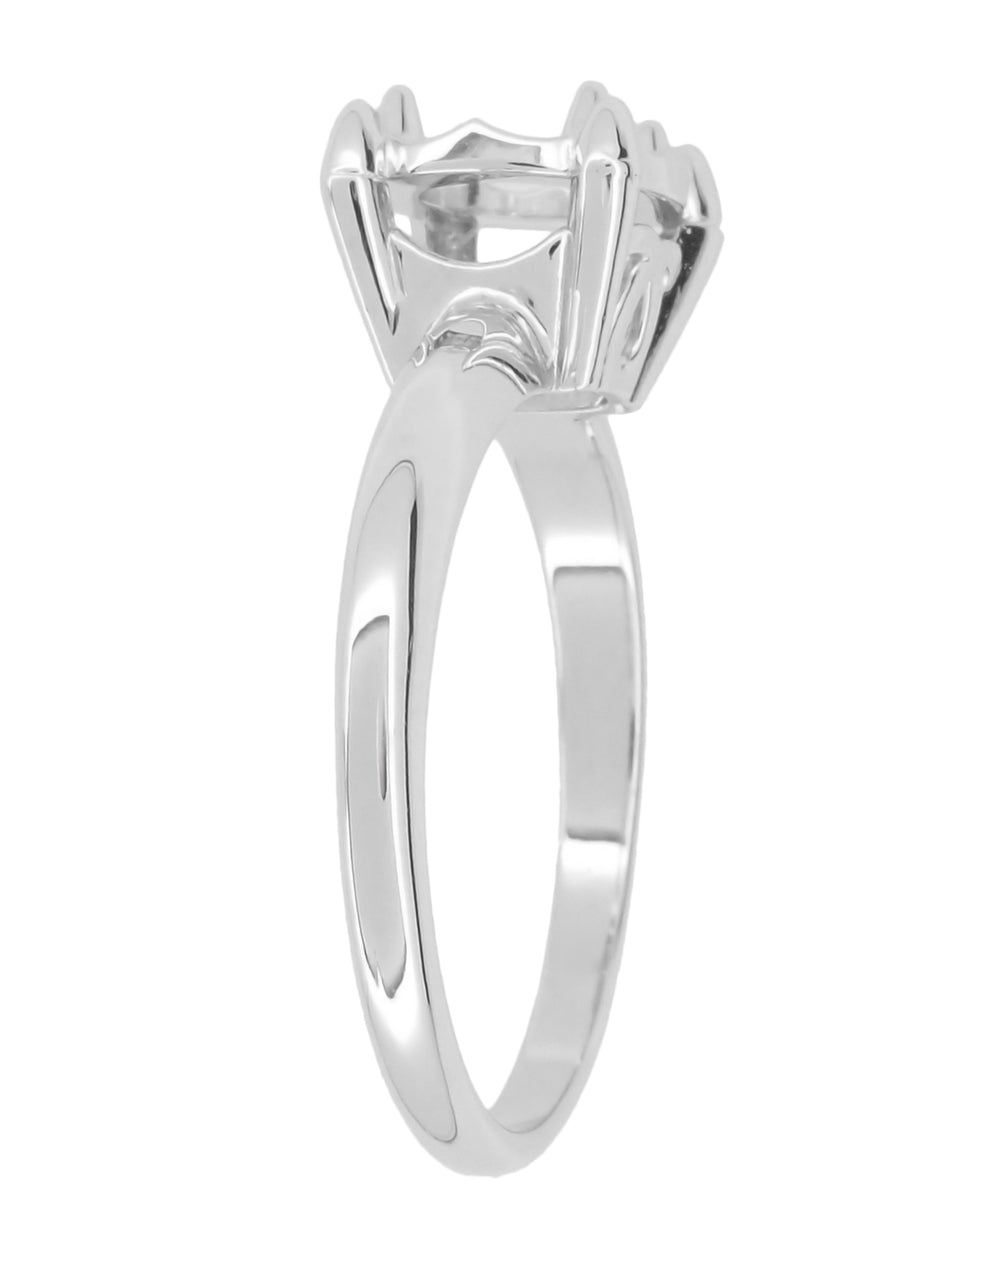 Vintage 1950's Design Illusion Solitaire Ring Setting in 14K White Gold - for a 3/4 Ct (6mm) to 1 Ct Diamond (6.5mm) - Item: R848W75 - Image: 3